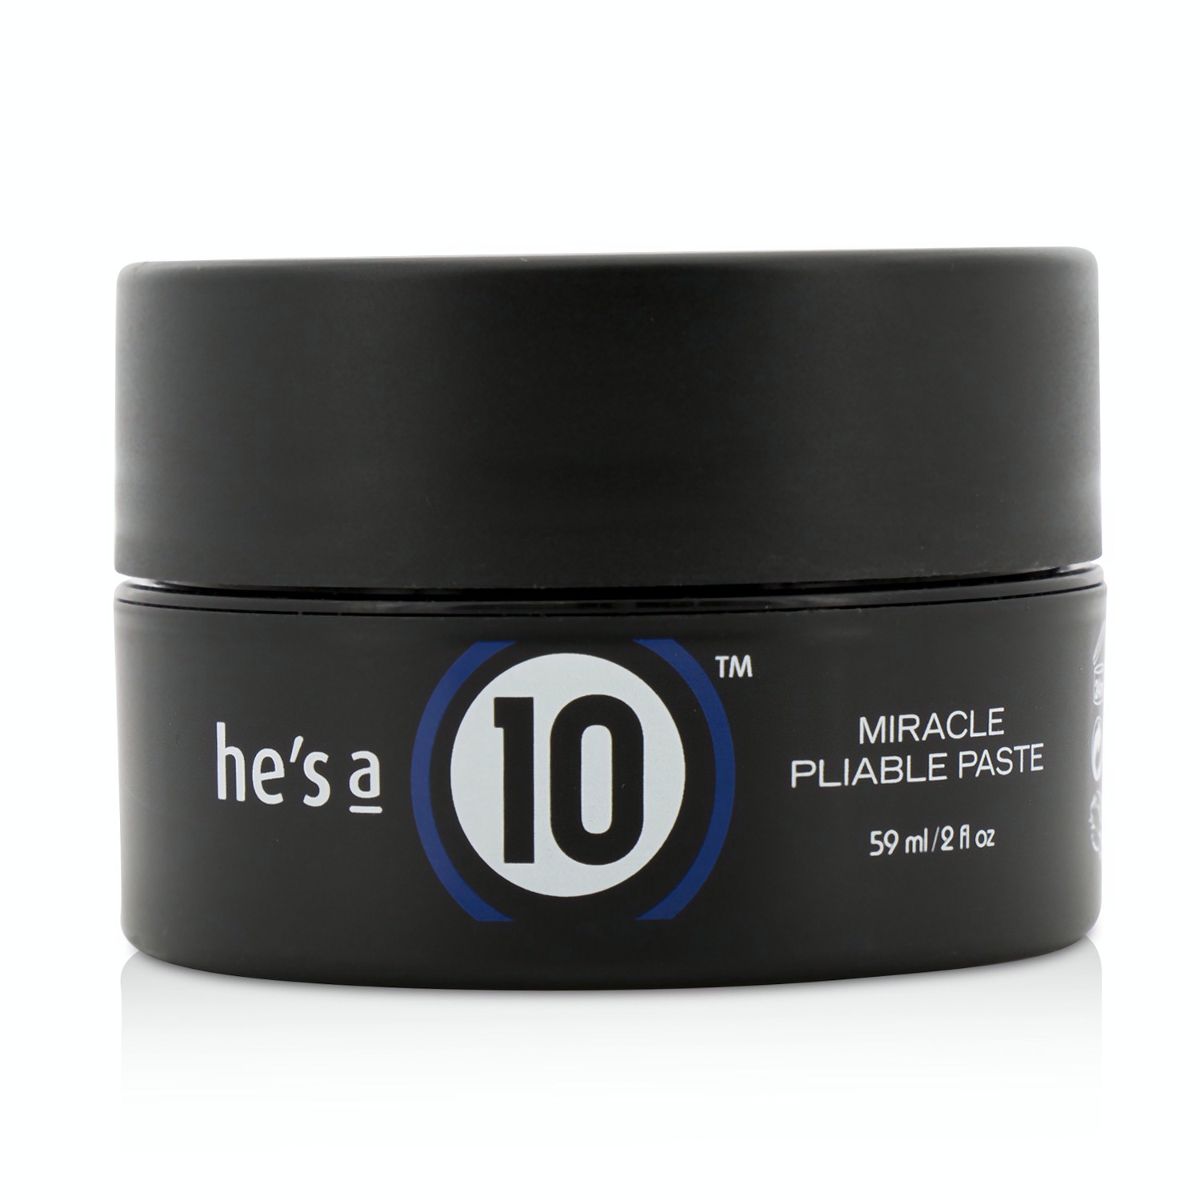 Hes A 10 Miracle Pliable Paste Its A 10 Image